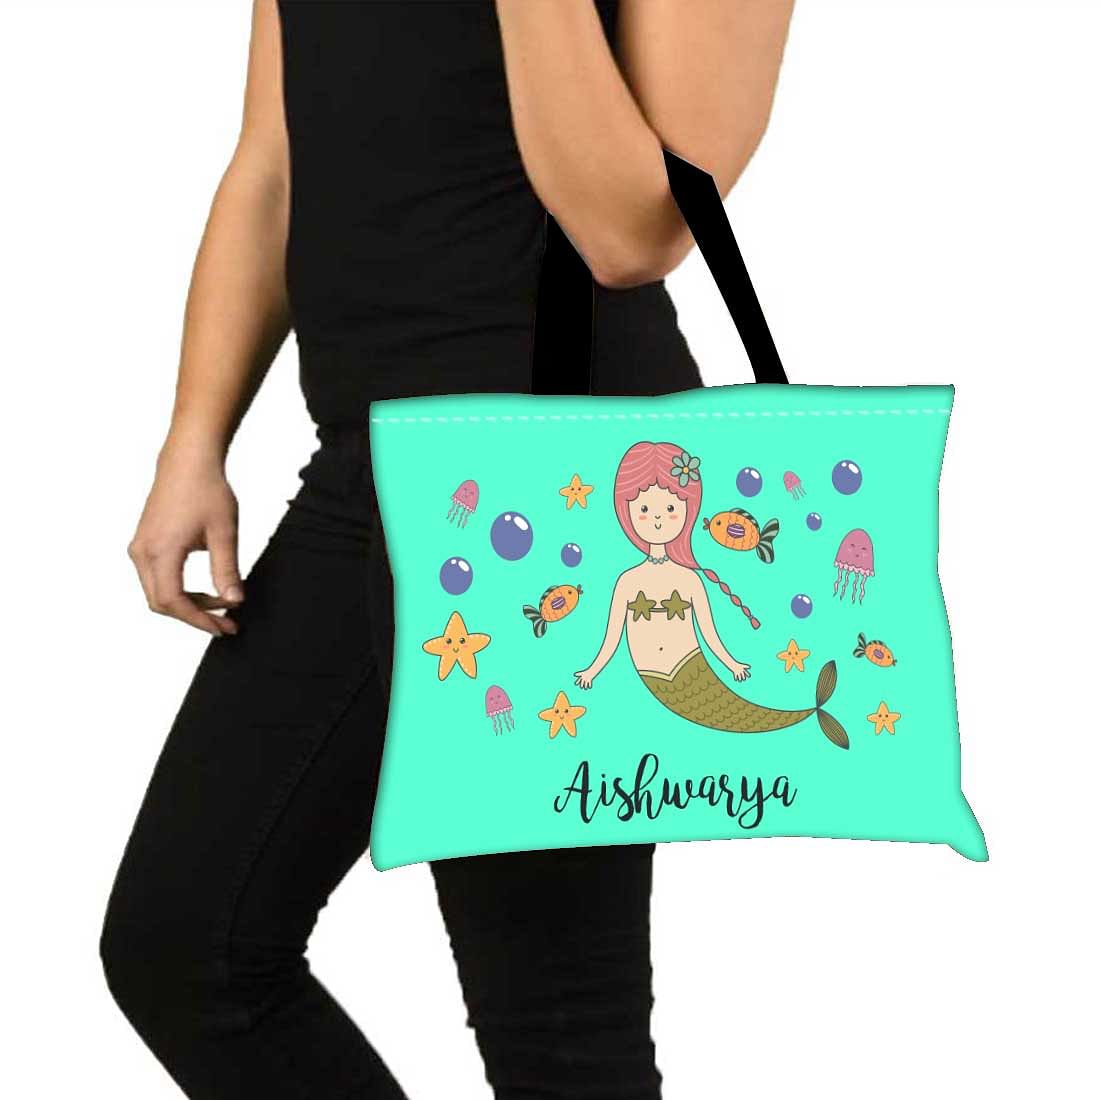 Nutcase Personalized Tote Bag for Women Gym Beach Travel Shopping Fashion Bags with Zip Closure and Internal Pocket to keep cash/valuables - Cute Mermaid Nutcase